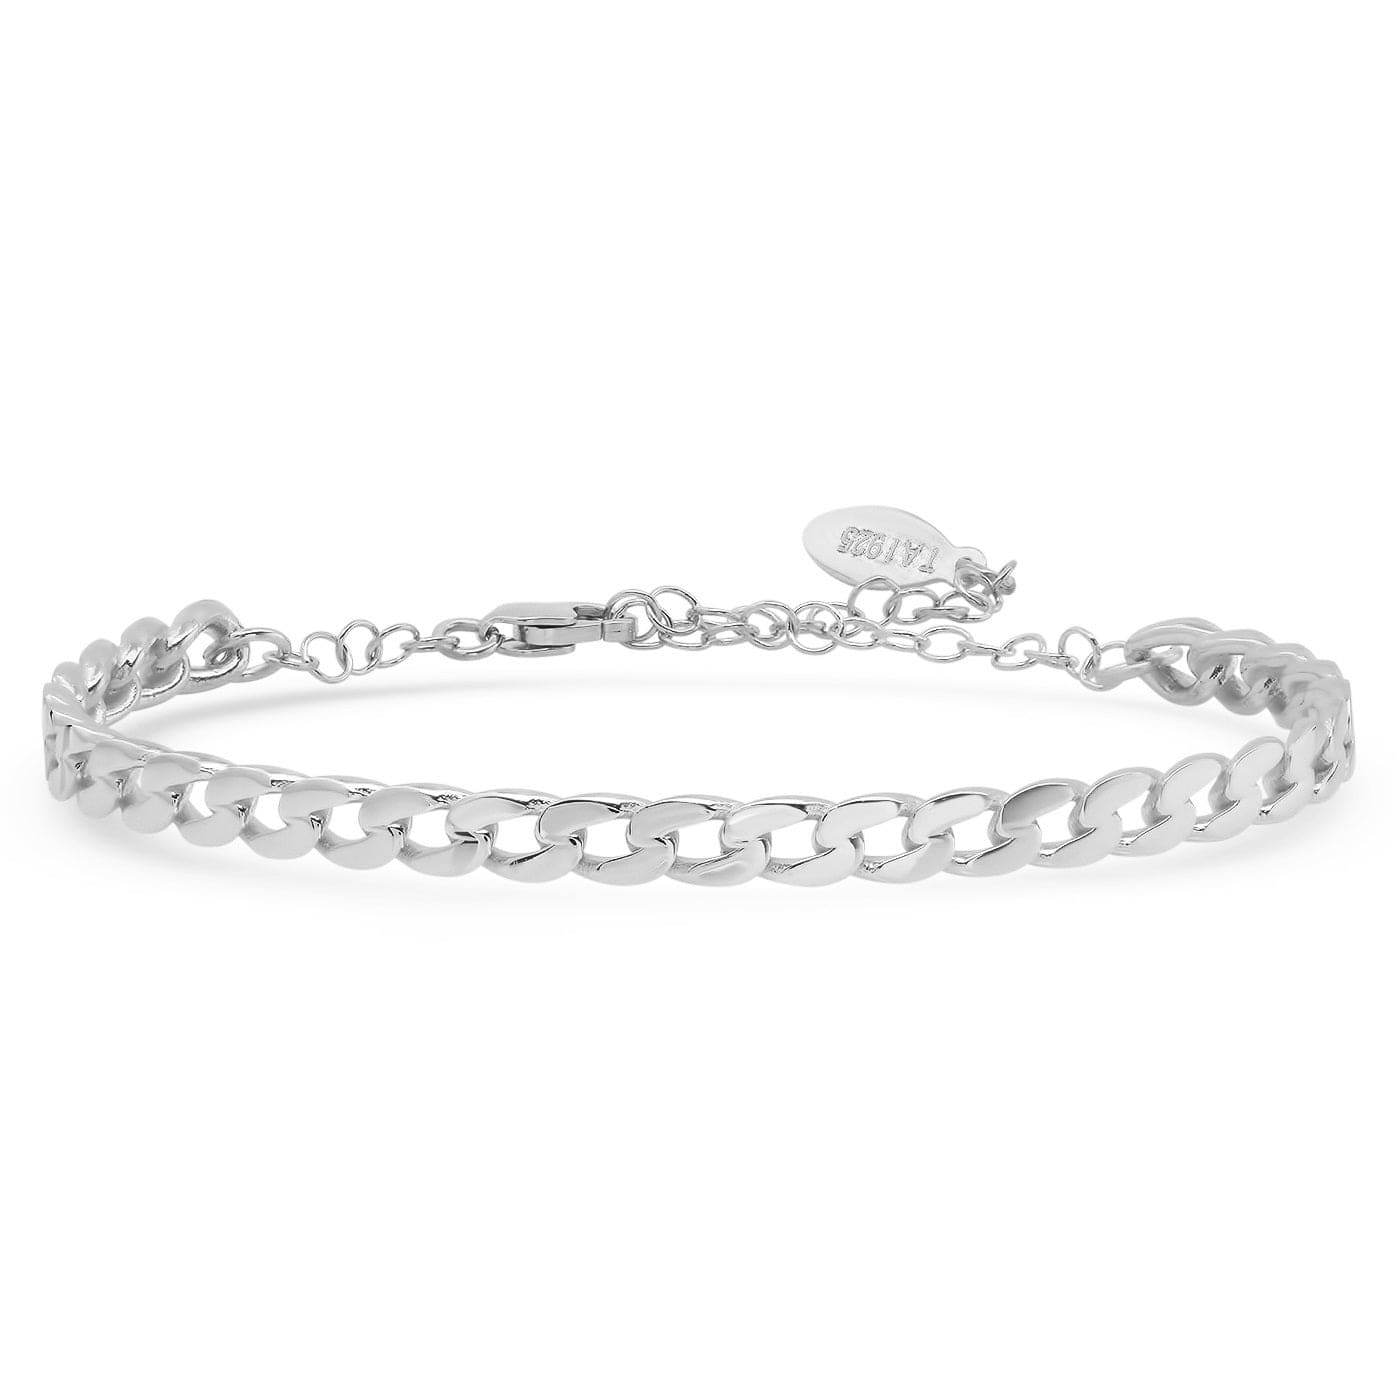 TAI JEWELRY Bracelet STERLING SILVER Chainlink Bangle With Chain Closure